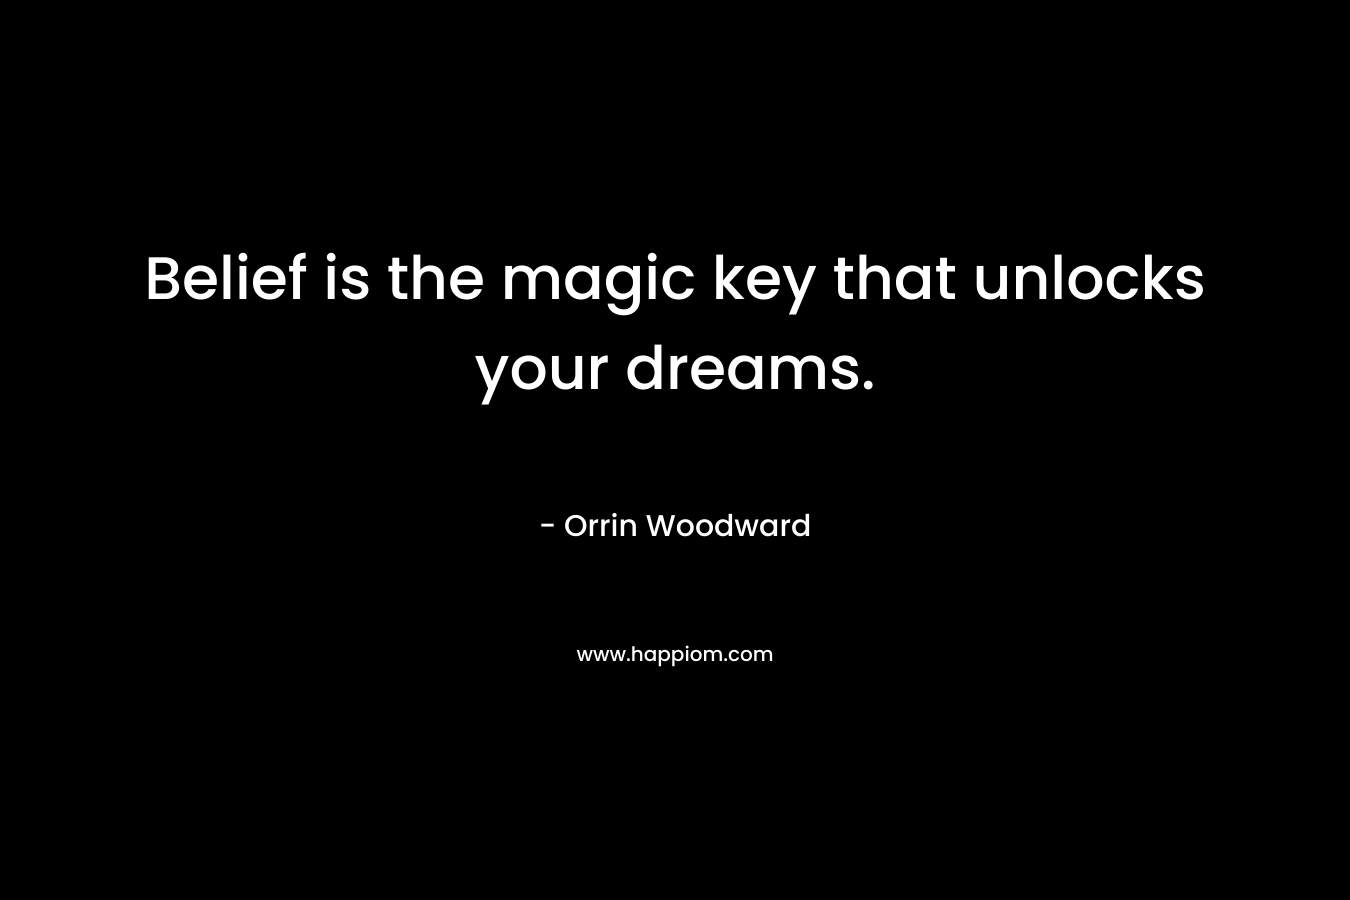 Belief is the magic key that unlocks your dreams.